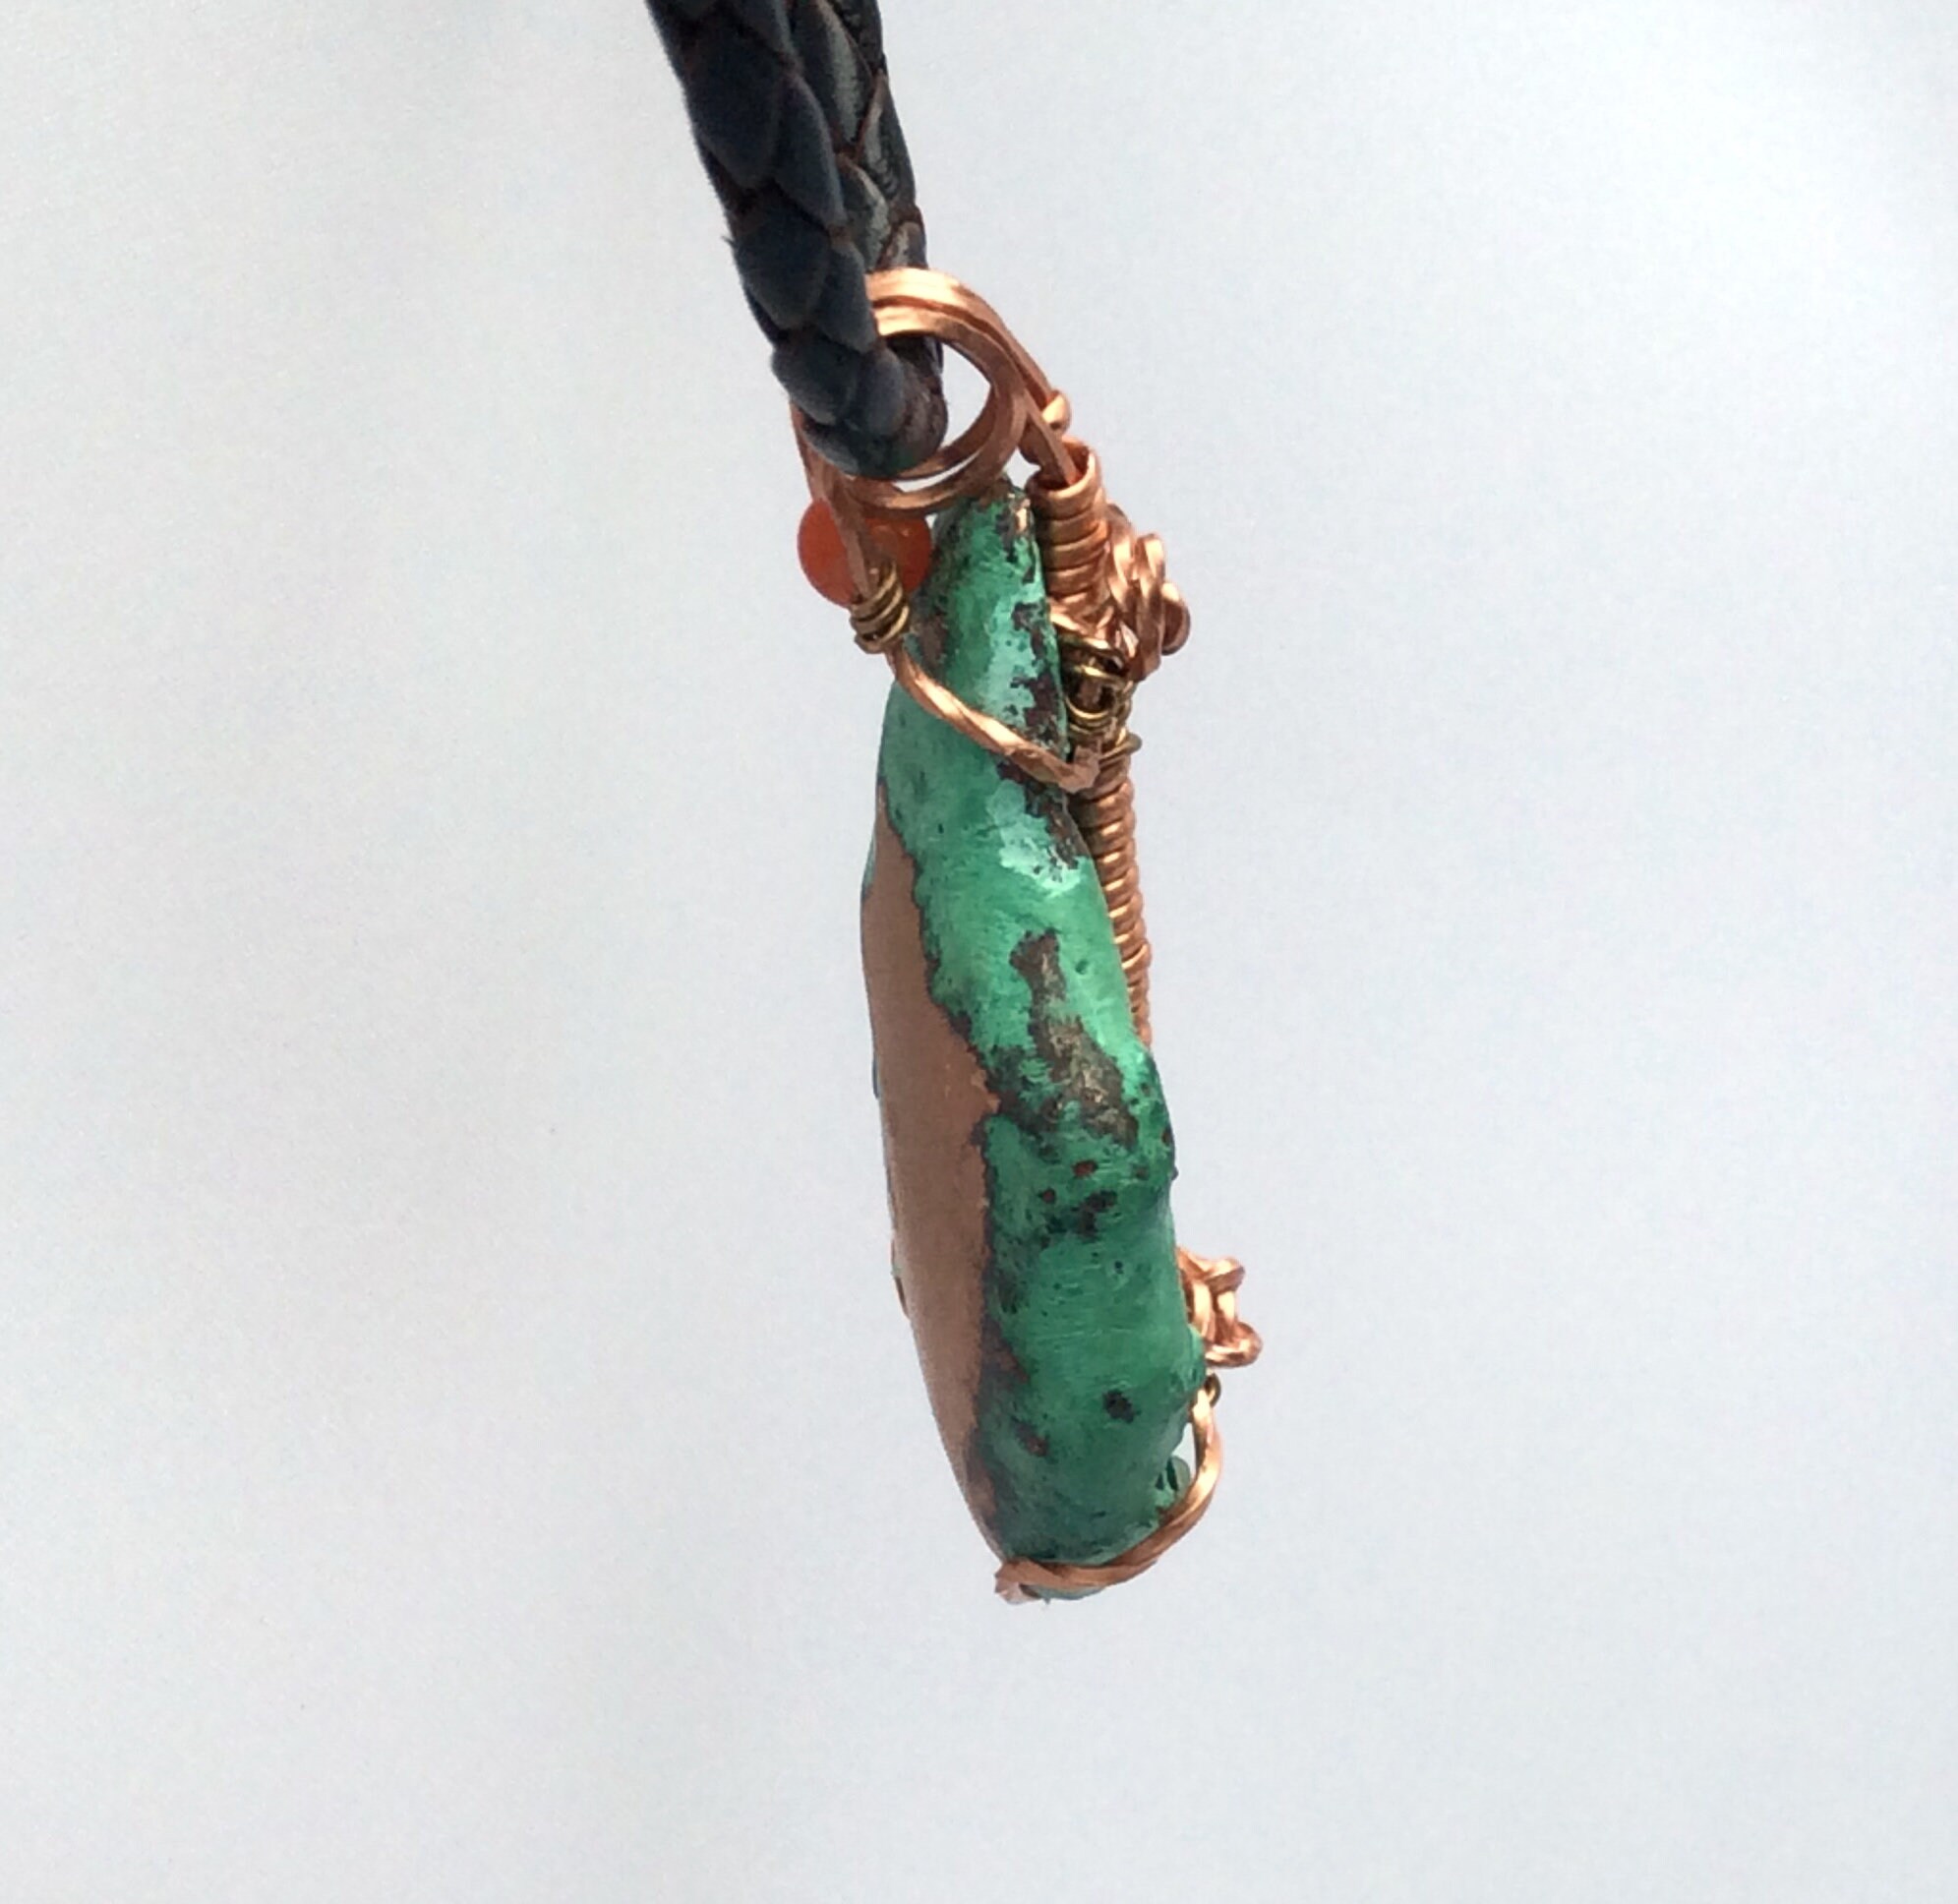 Copper and Patina Necklace, Stone Gift for Geologists, Splash Copper Necklace for Men and Women.